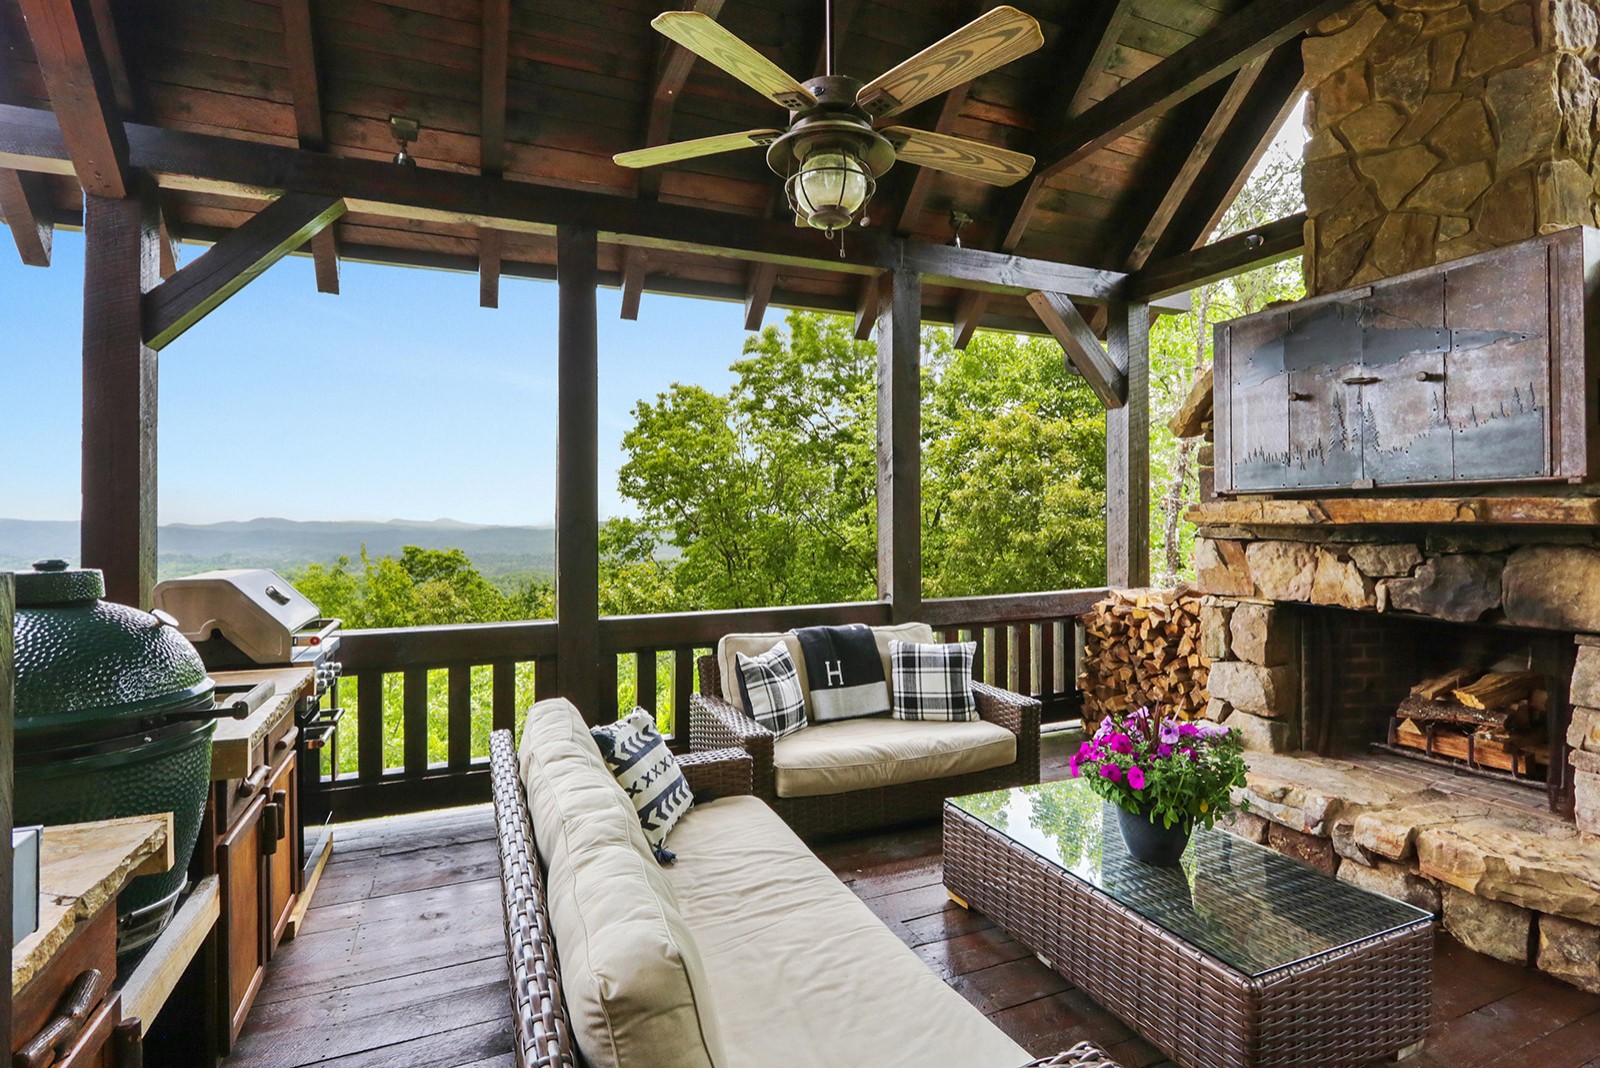 20 Magnificent Rustic Deck Designs That Will Captivate You